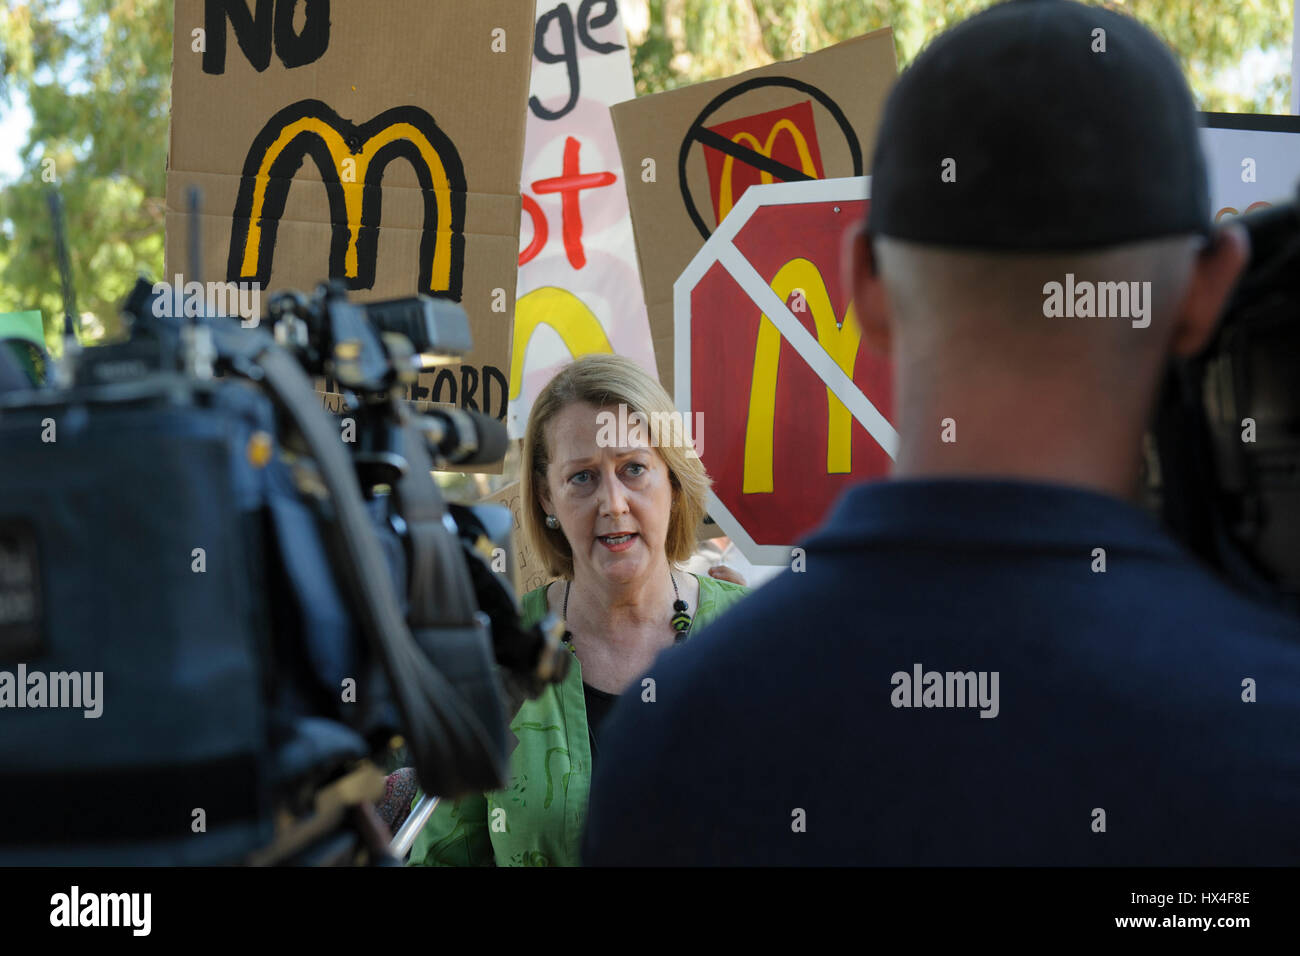 Guildford, Western Australia, Australia. 25th March, 2017. Local State politician, the Hon. Michelle Roberts MLA, speaking to the press in support of protesters at protest rally in opposition to the proposed building of a McDonalds in their local community. Credit: Sheldon Levis/Alamy Live News Stock Photo